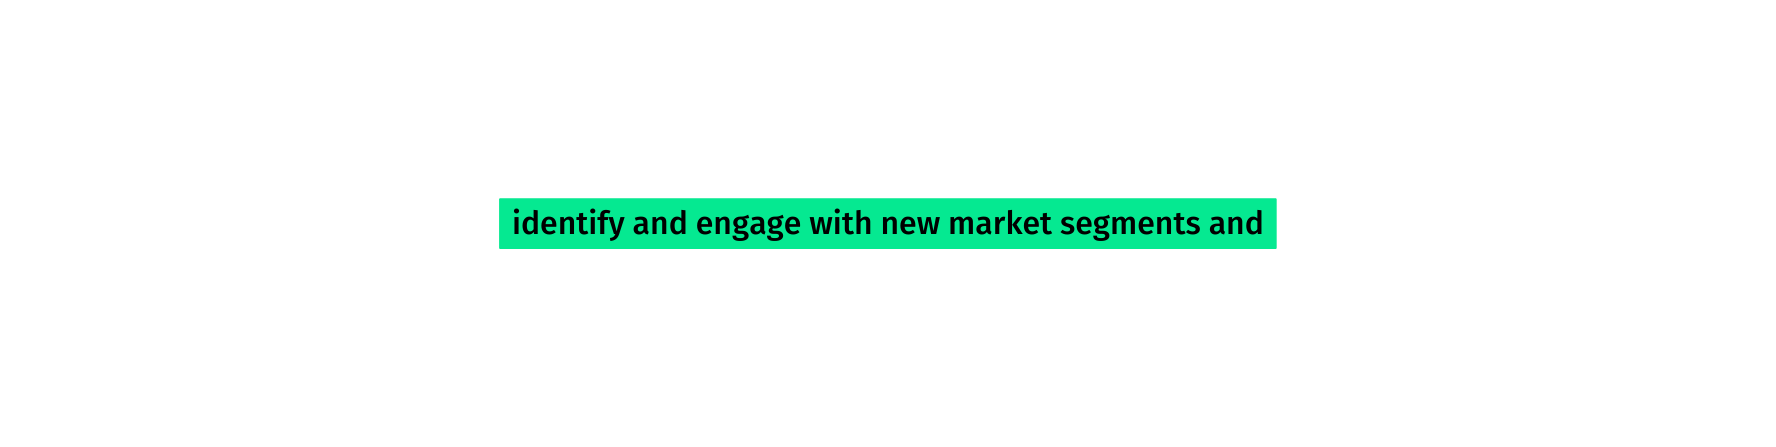 identify and engage with new market segments and